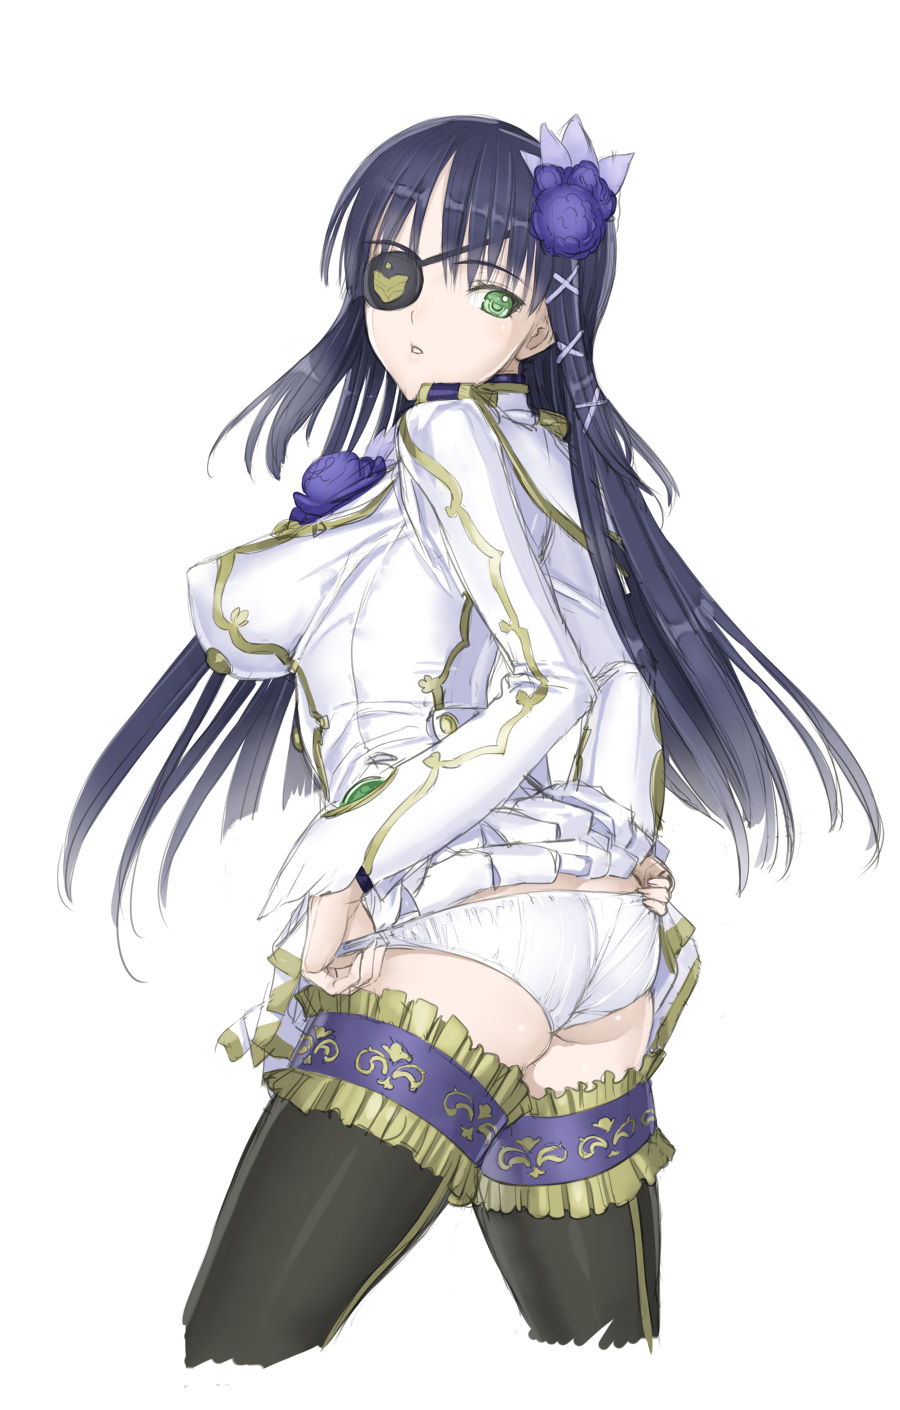 ass black_hair black_legwear boots breasts eyepatch green_eyes highres impossible_clothes large_breasts long_hair nagisa_(psp2i) nakaba_reimei panties phantasy_star phantasy_star_portable_2_infinity skirt skirt_lift solo thigh-highs thigh_boots thighhighs underwear uniform white_background white_panties